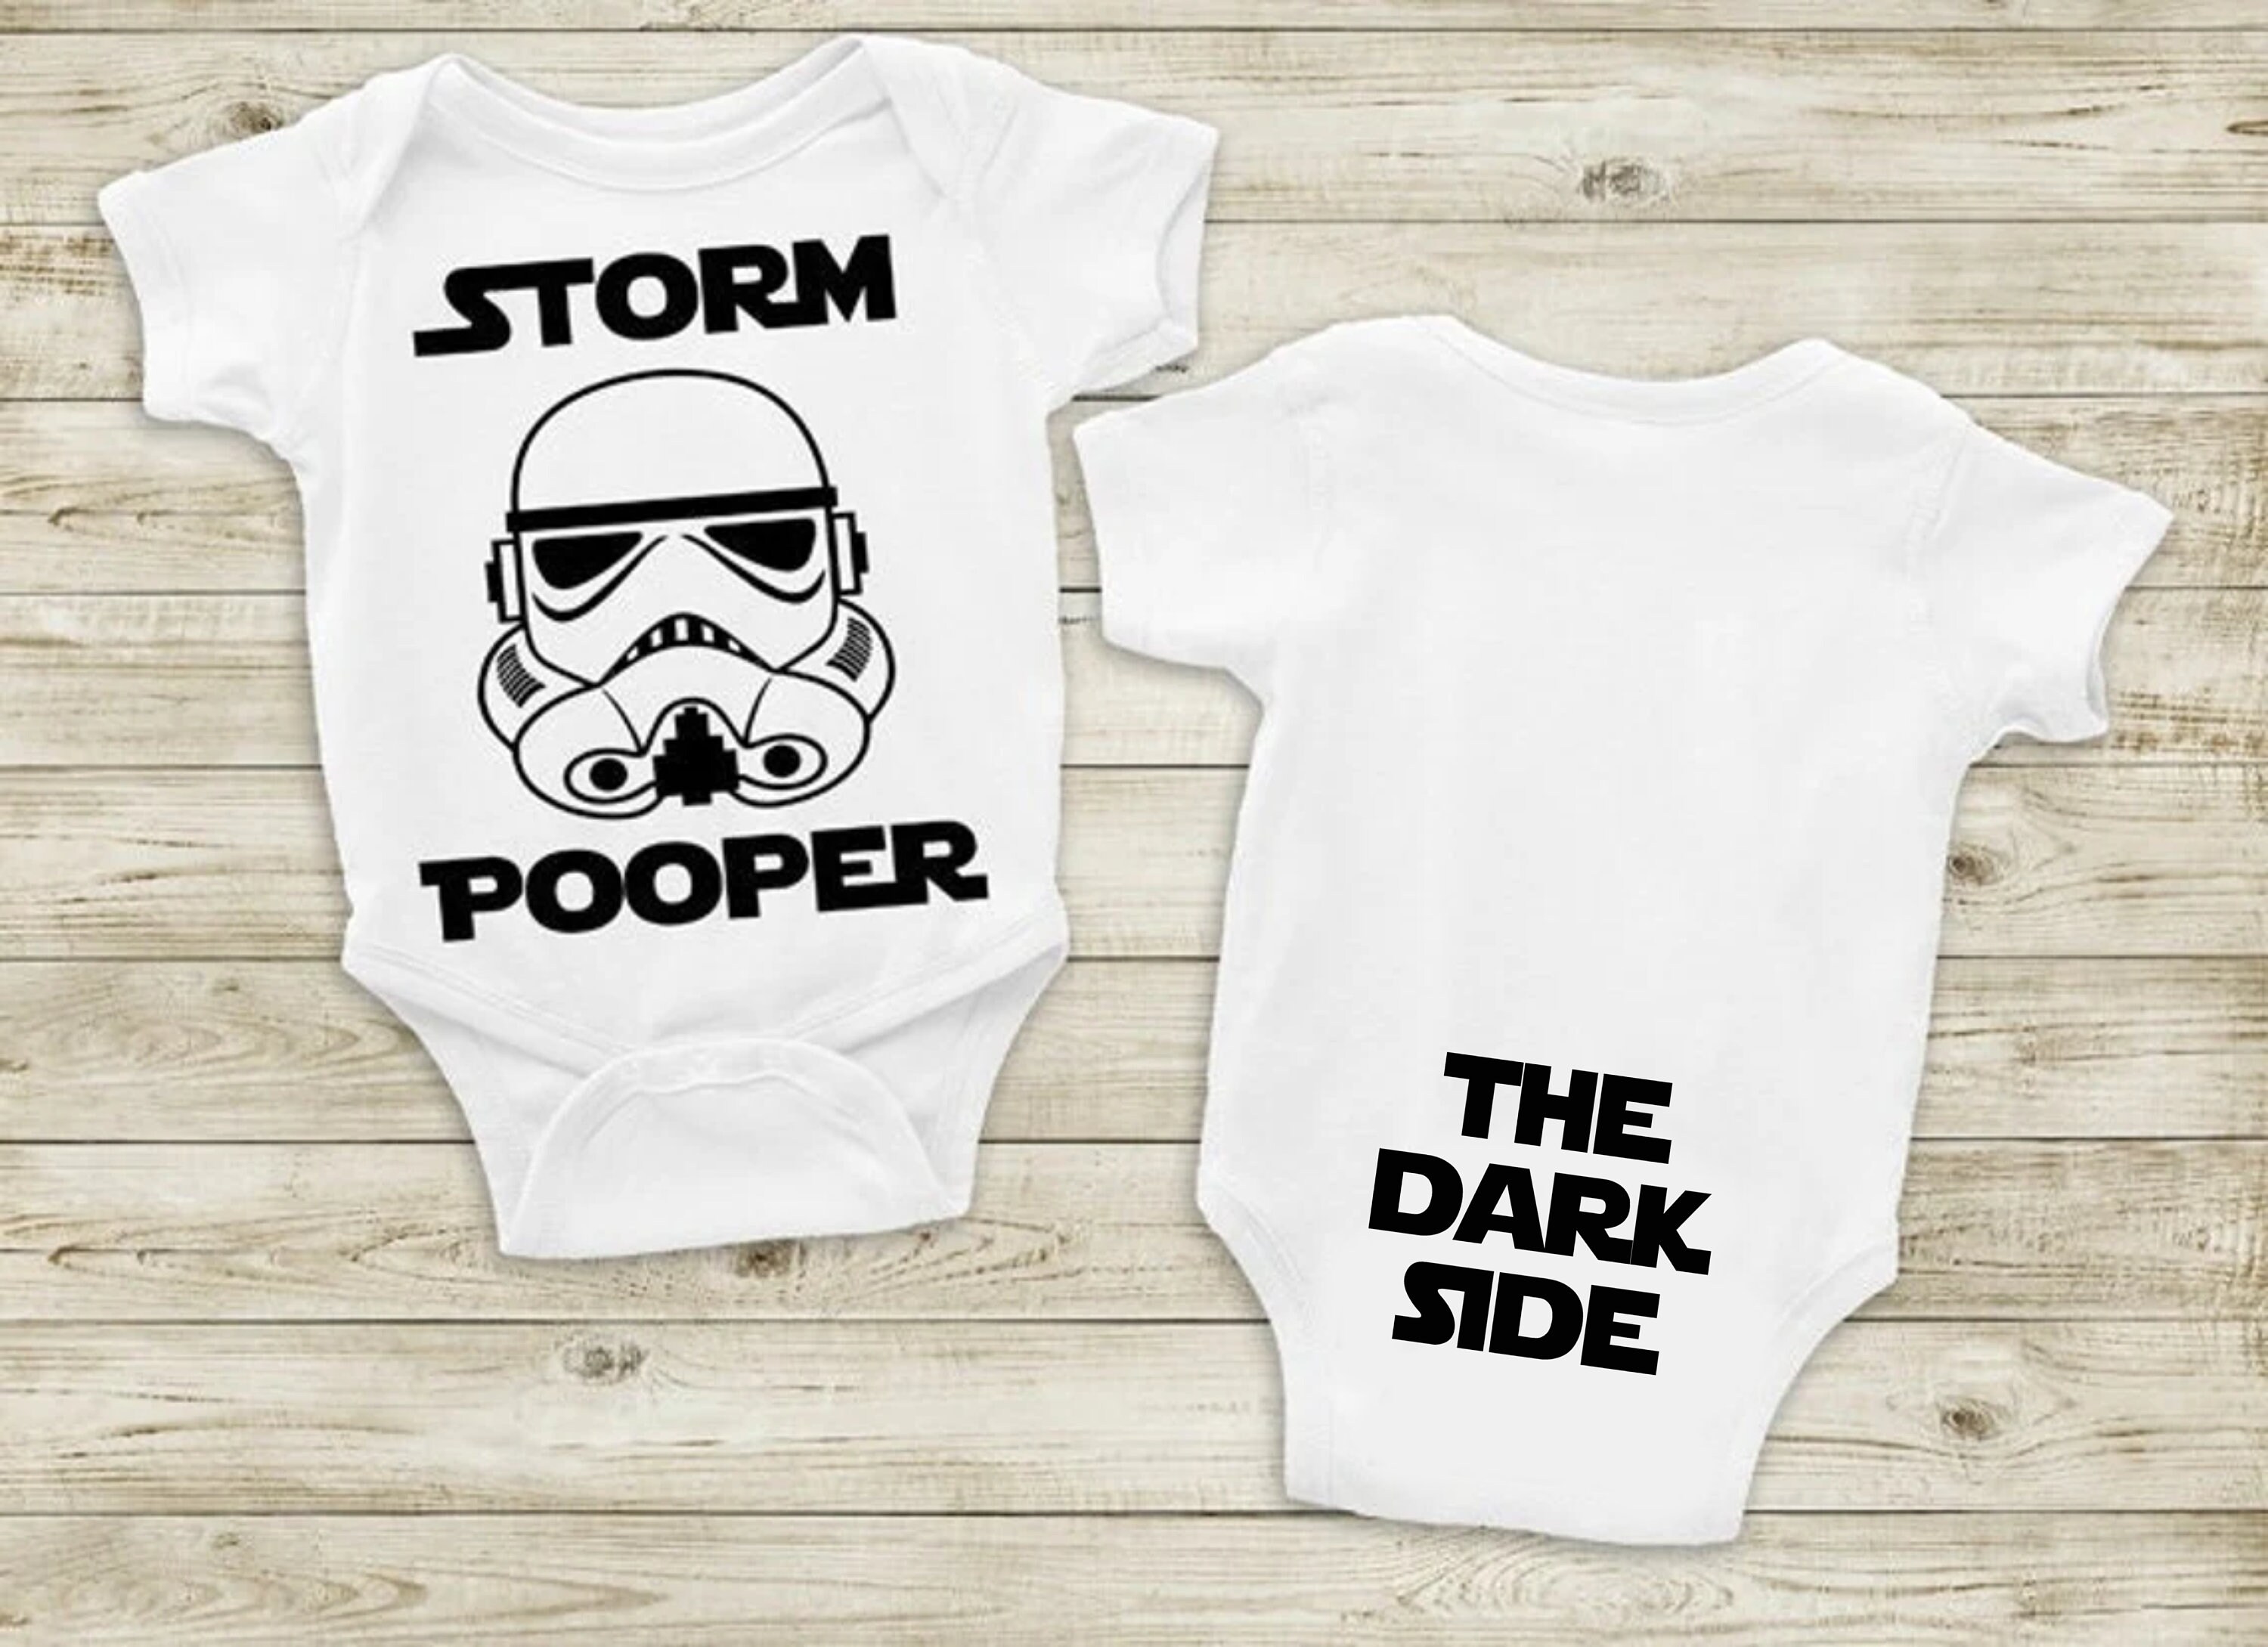 Storm Pooper Fun Star Wars Inspired Baby Boy Girl Sleepsuit Made in the UK Using 100% Fine Combed Cotton 